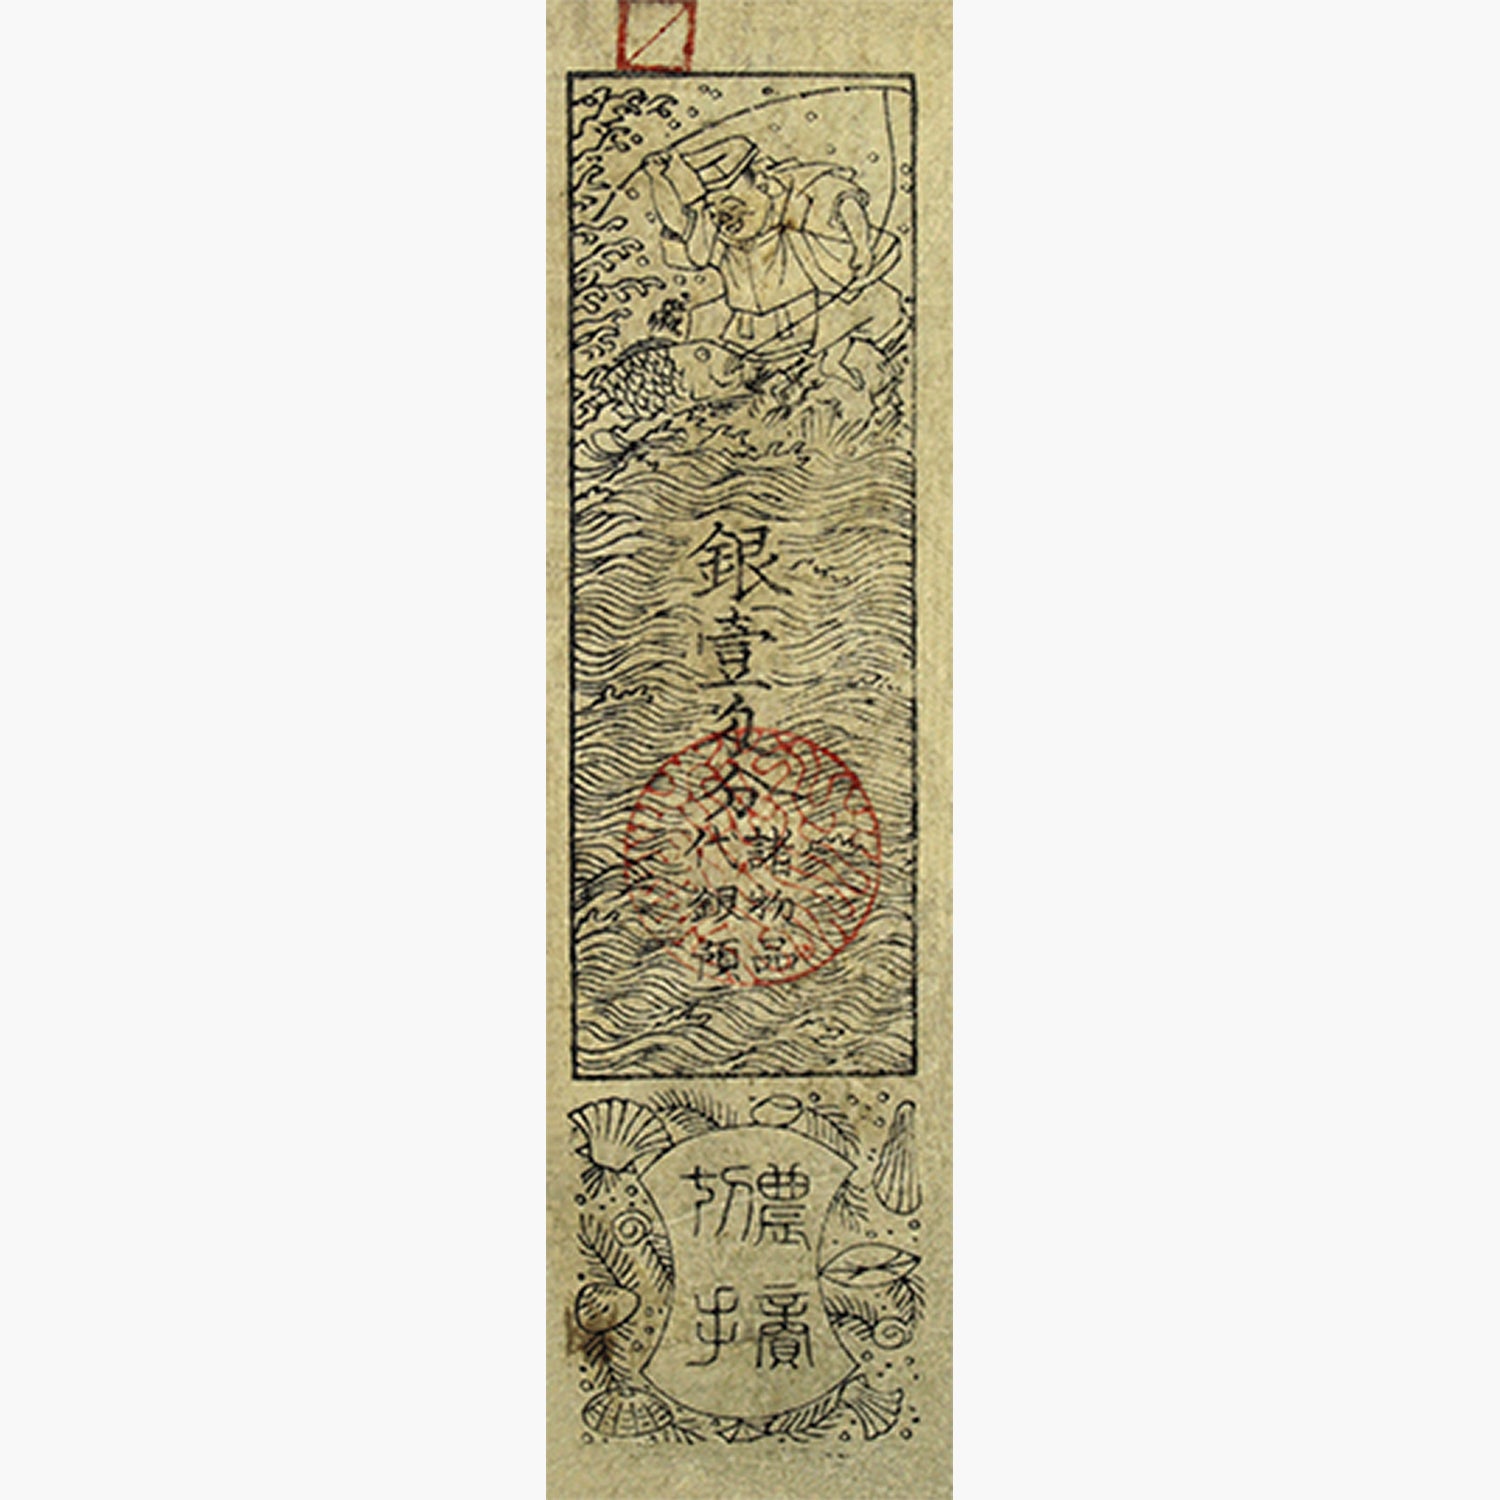 Unearthed - The Paper Money of the Samurai